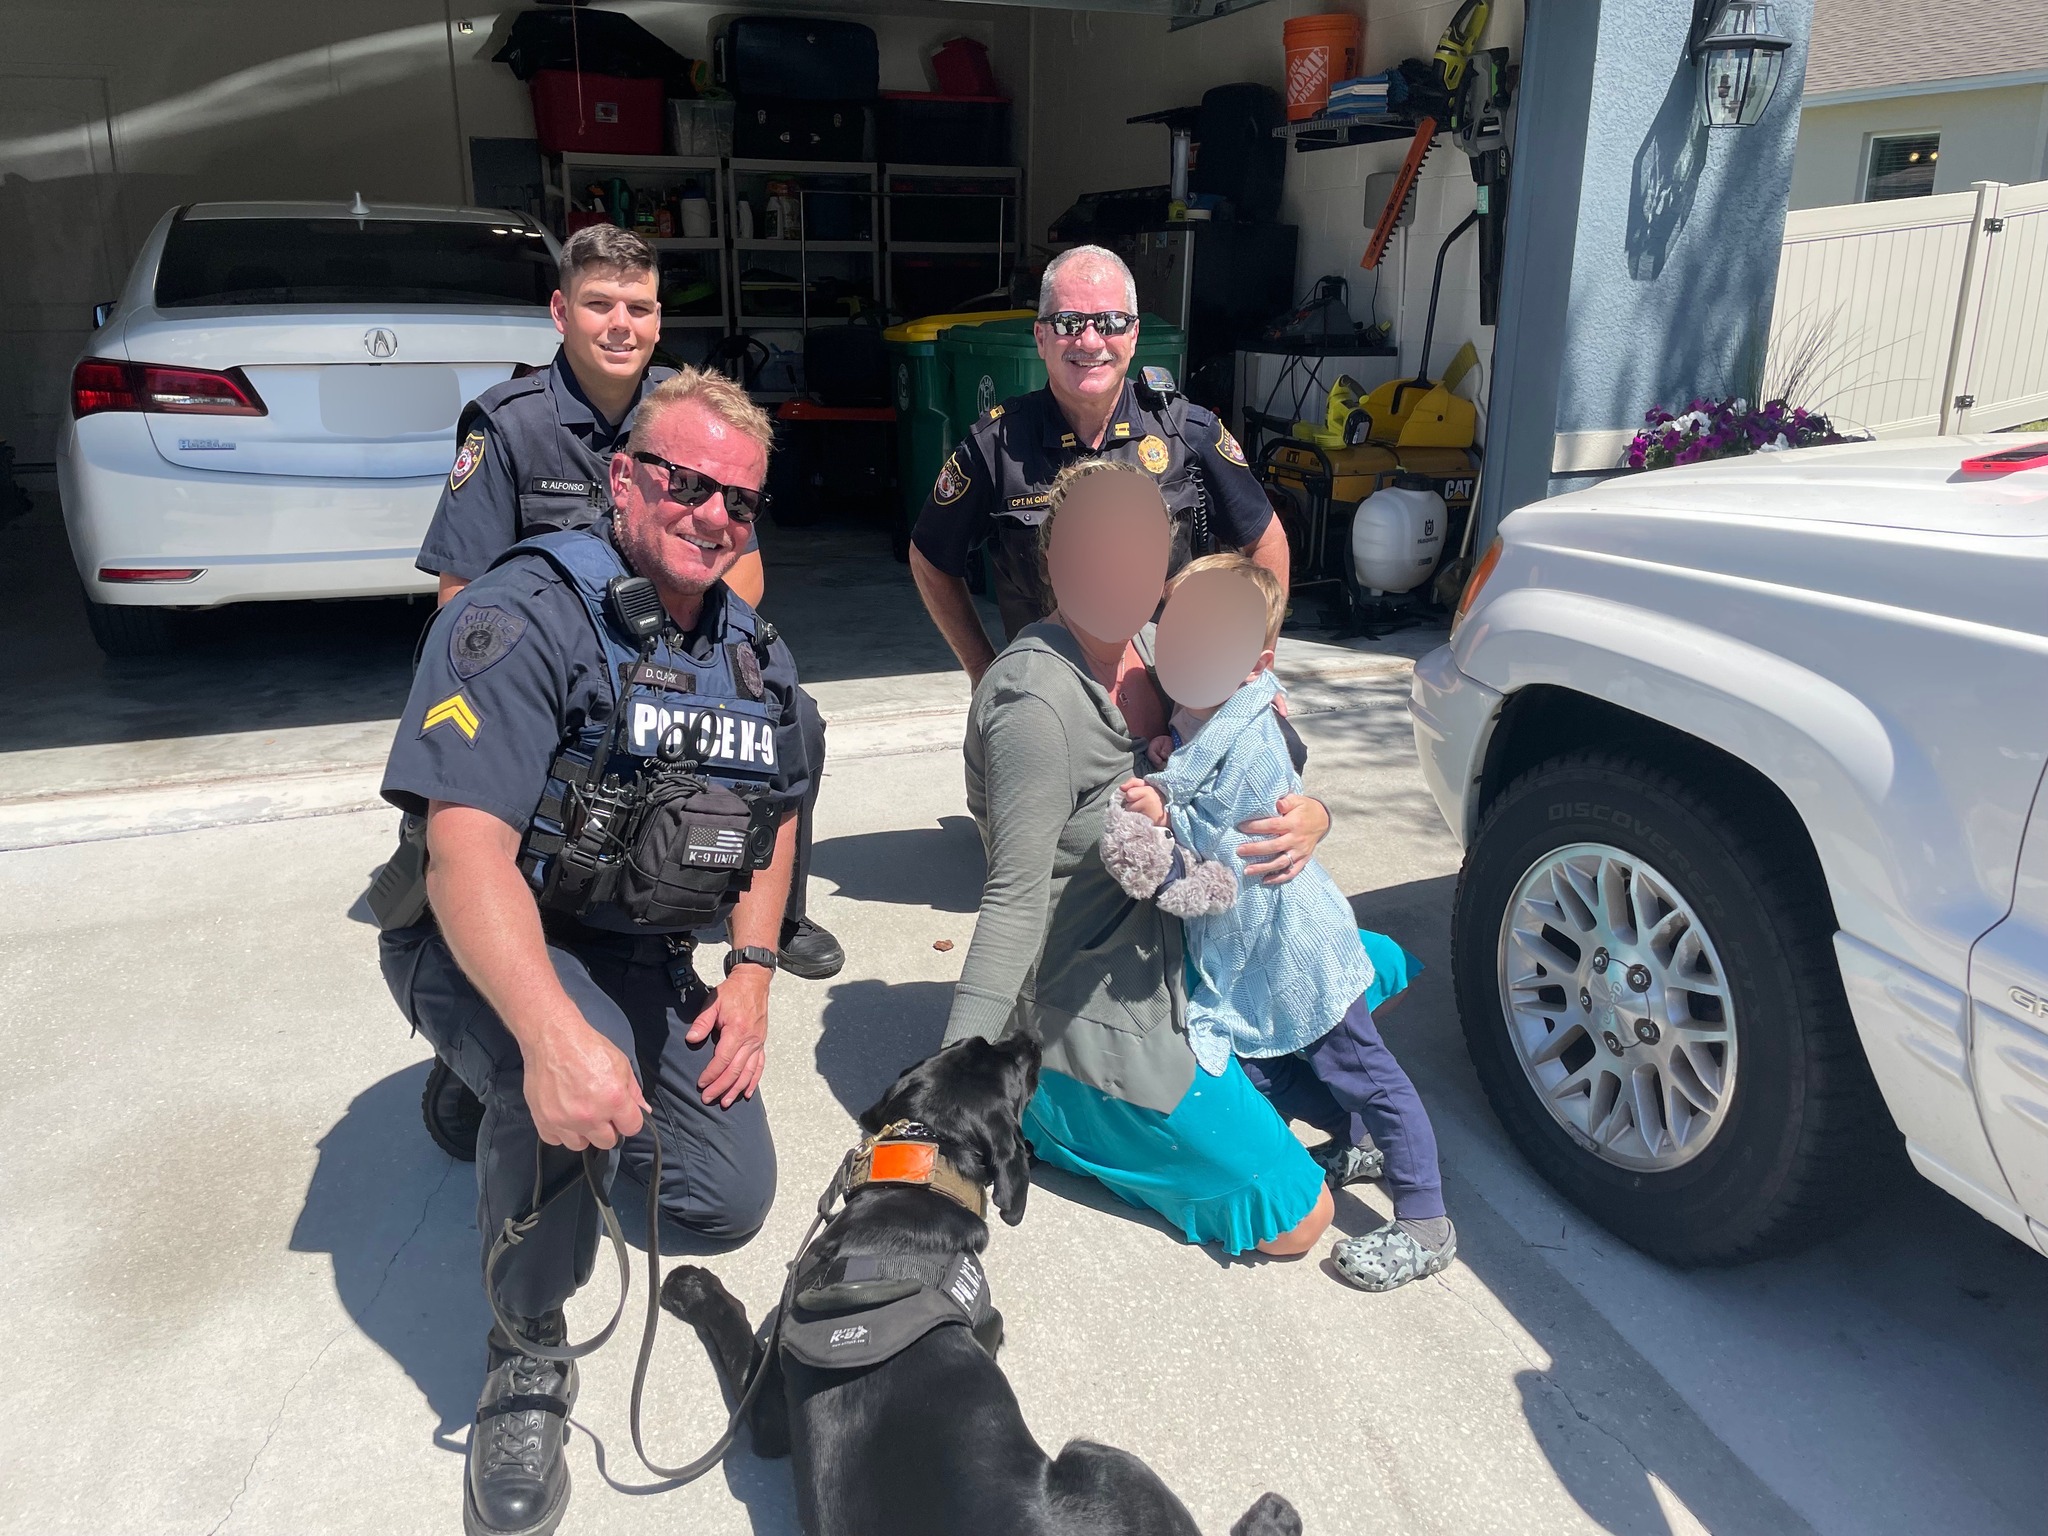 police officers with dog posing with woman and her son